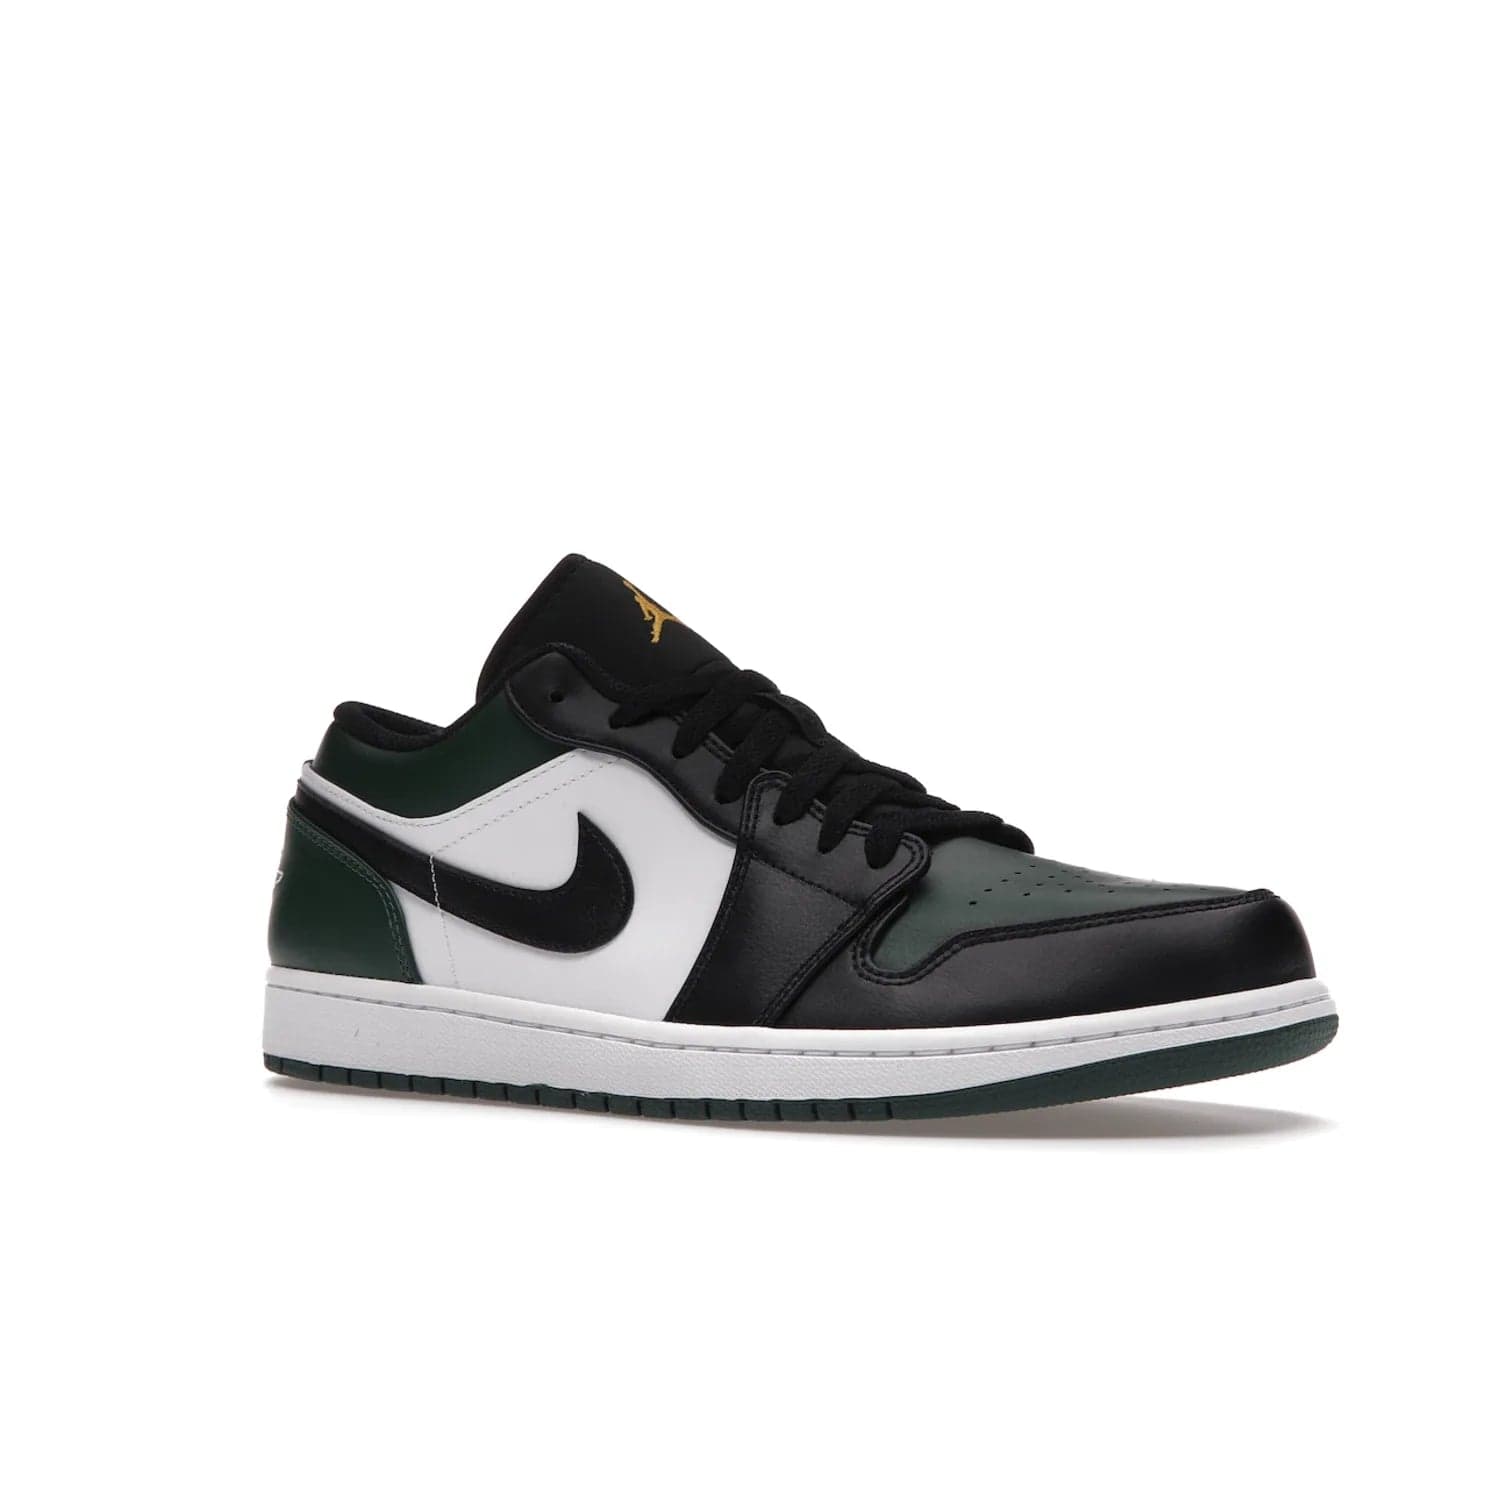 Jordan 1 Low Green Toe - Image 4 - Only at www.BallersClubKickz.com - The Jordan 1 Low Green Toe features white, black and Noble Green leather with black Swoosh. Get the classic Bred Toe-inspired color blocking with green perforated toe box. White and green Air sole completes the design. Released in October 2021 at only $100. Grab your pair now!